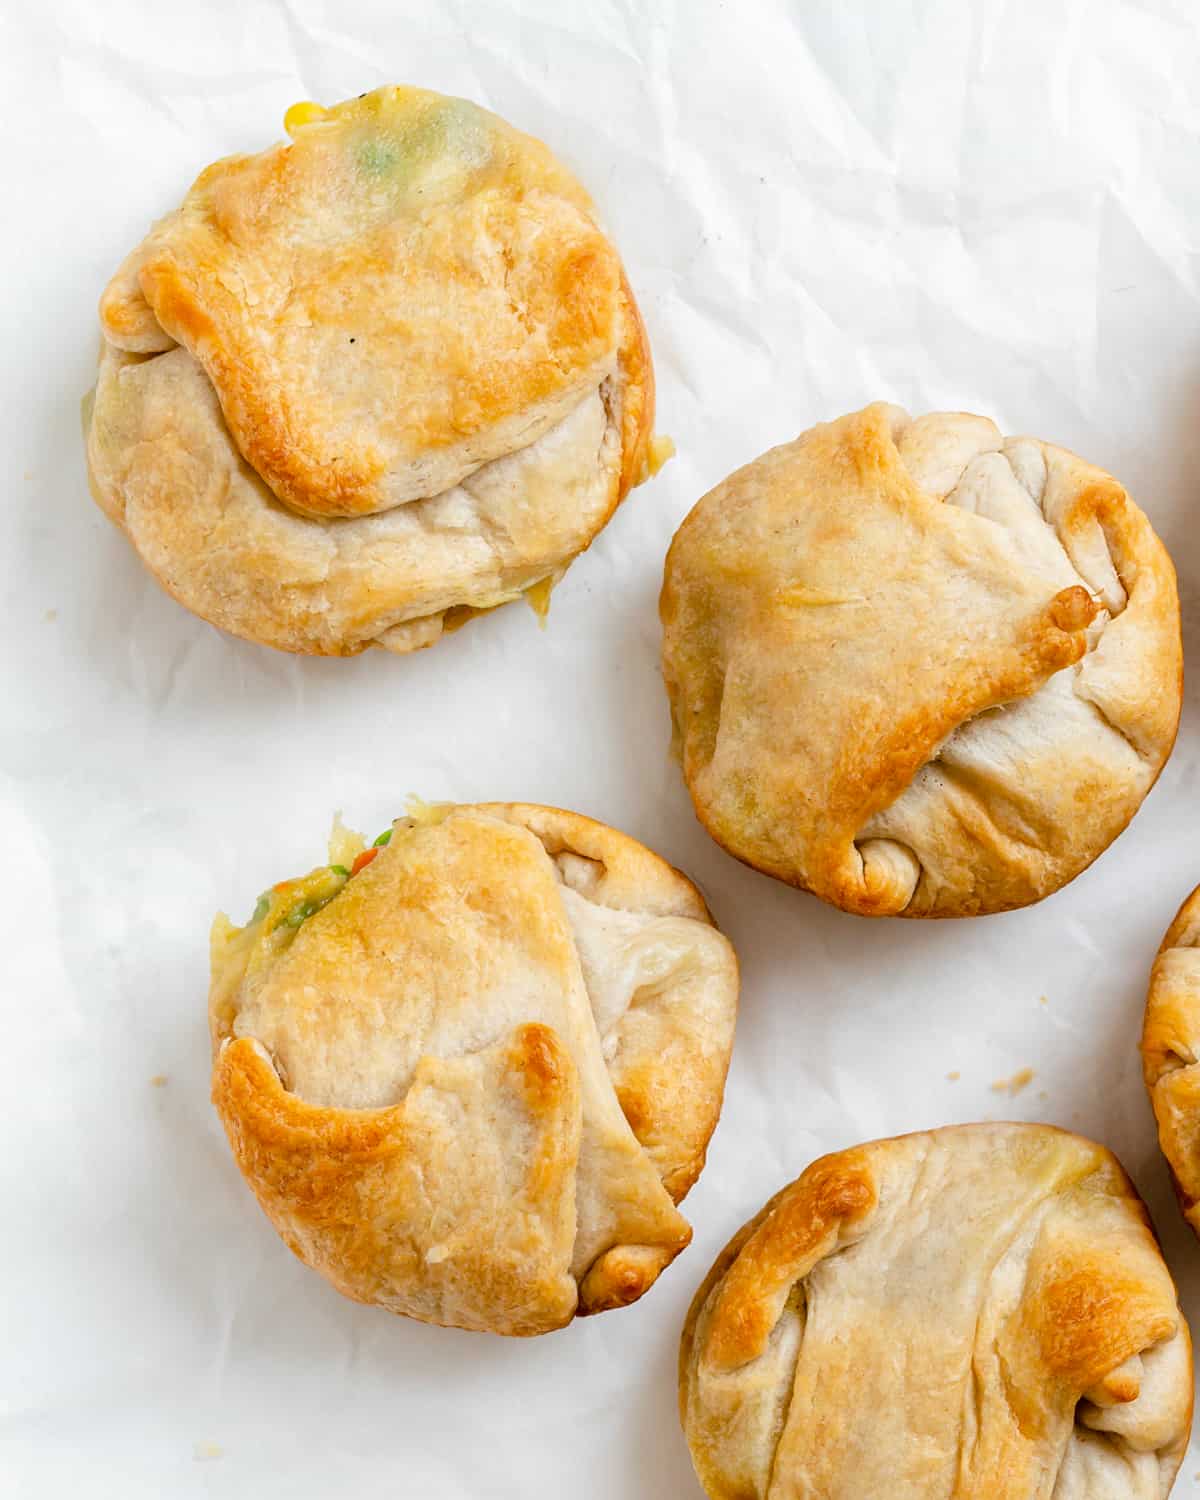 completed Mini Vegan Pot Pies scattered on a white surface